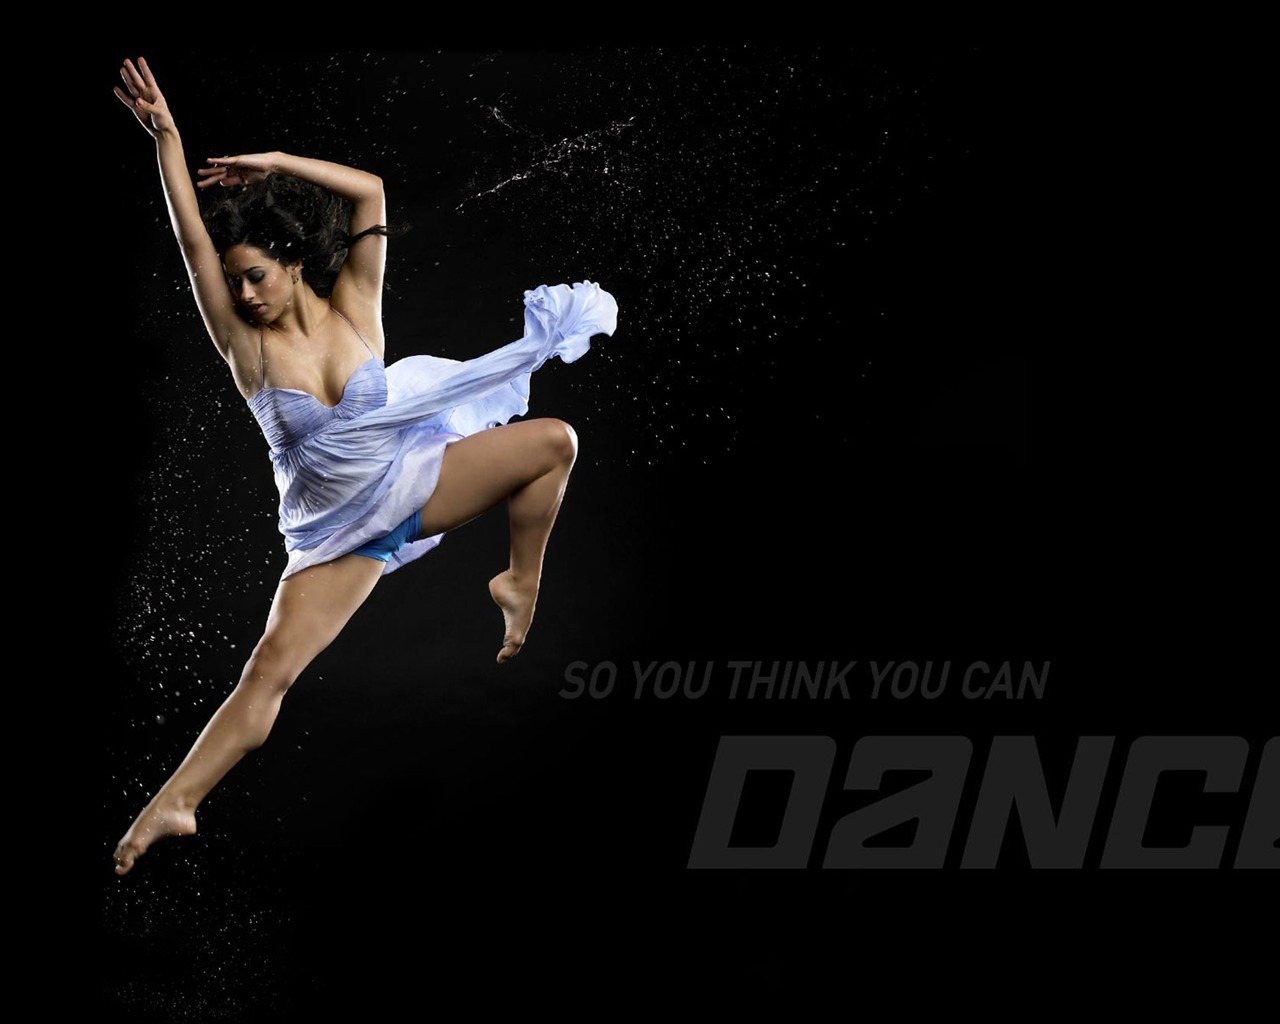 So You Think You Can Dance 舞林争霸 壁纸(一)3 - 1280x1024